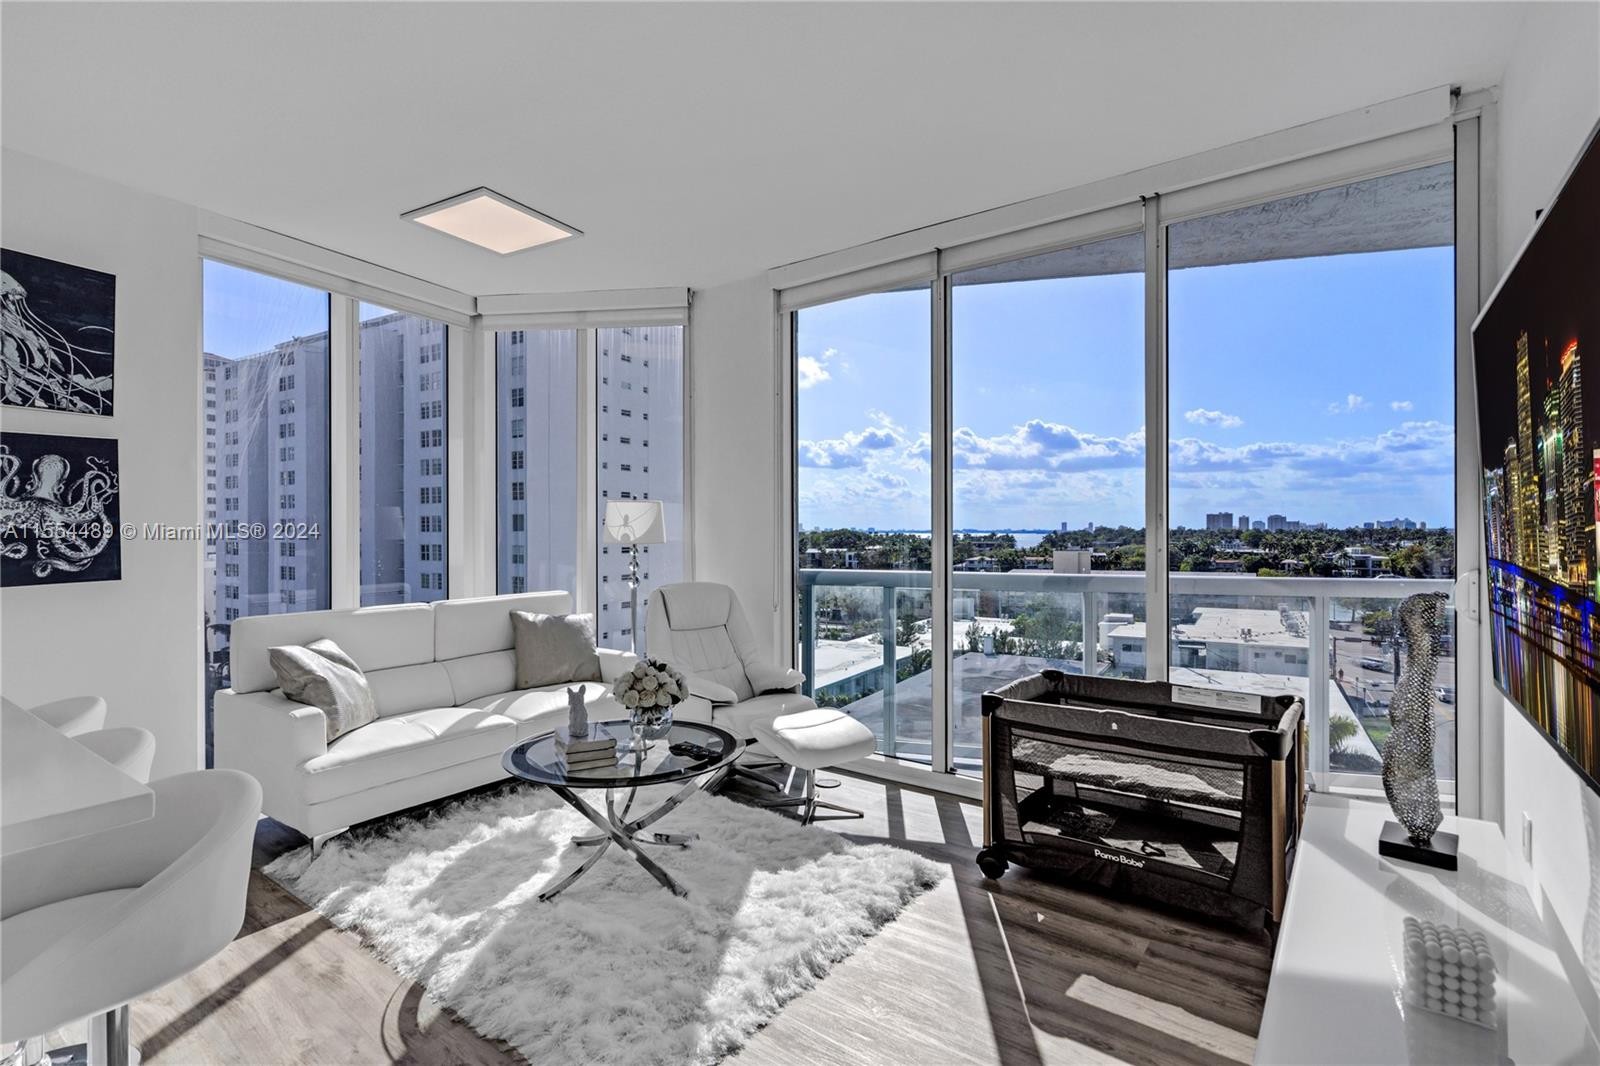 11. 6515 Collins Ave